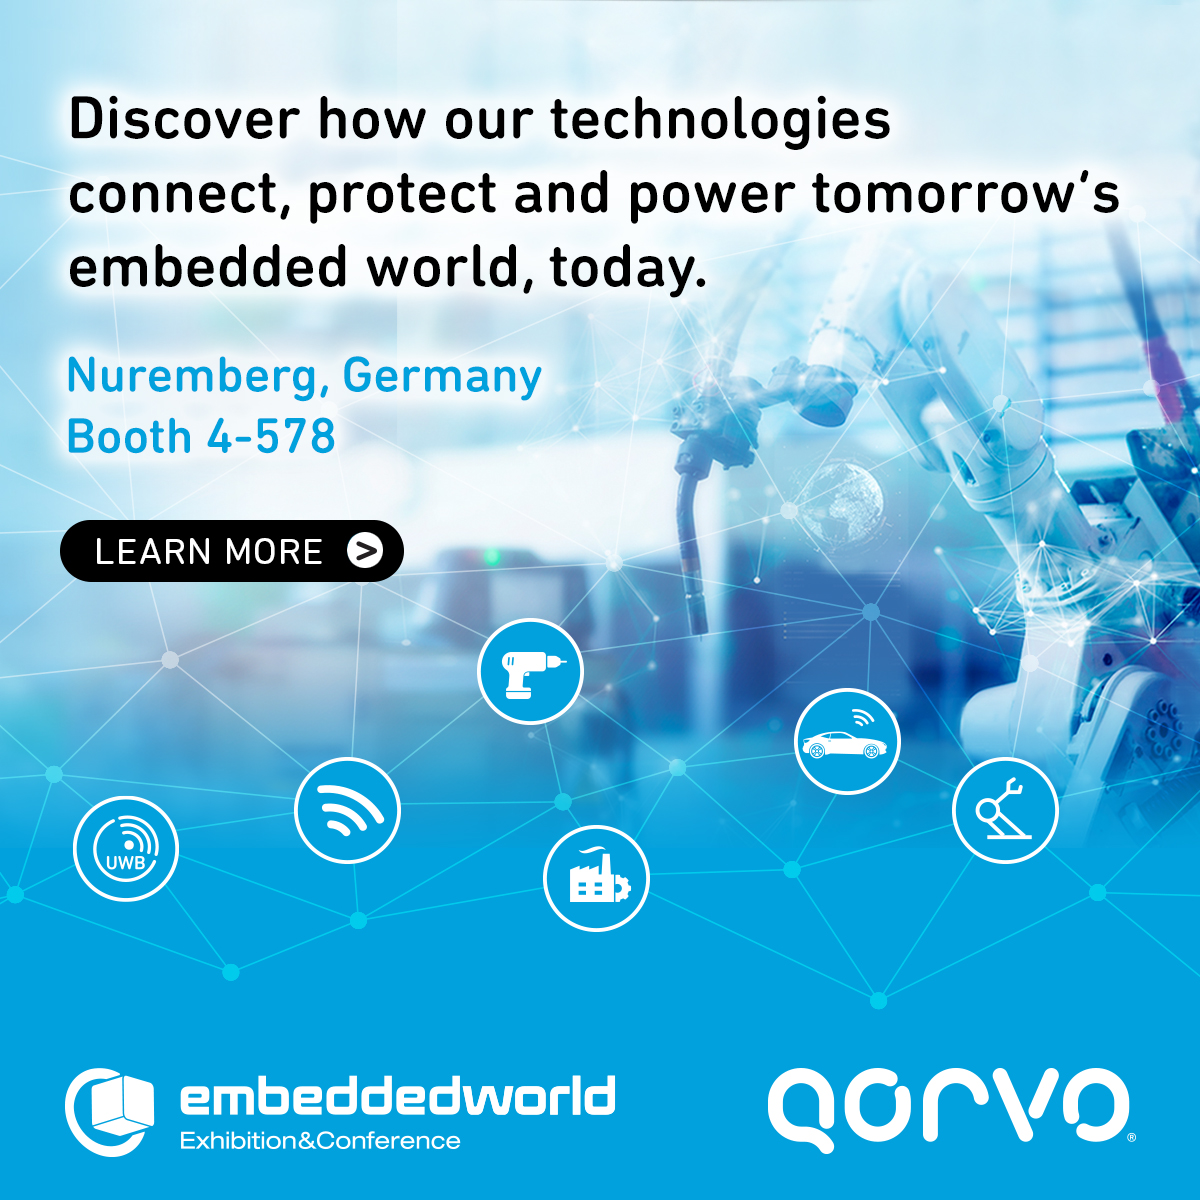 Qorvo® Showcases Technologies that Connect, Protect and Power the Embedded World